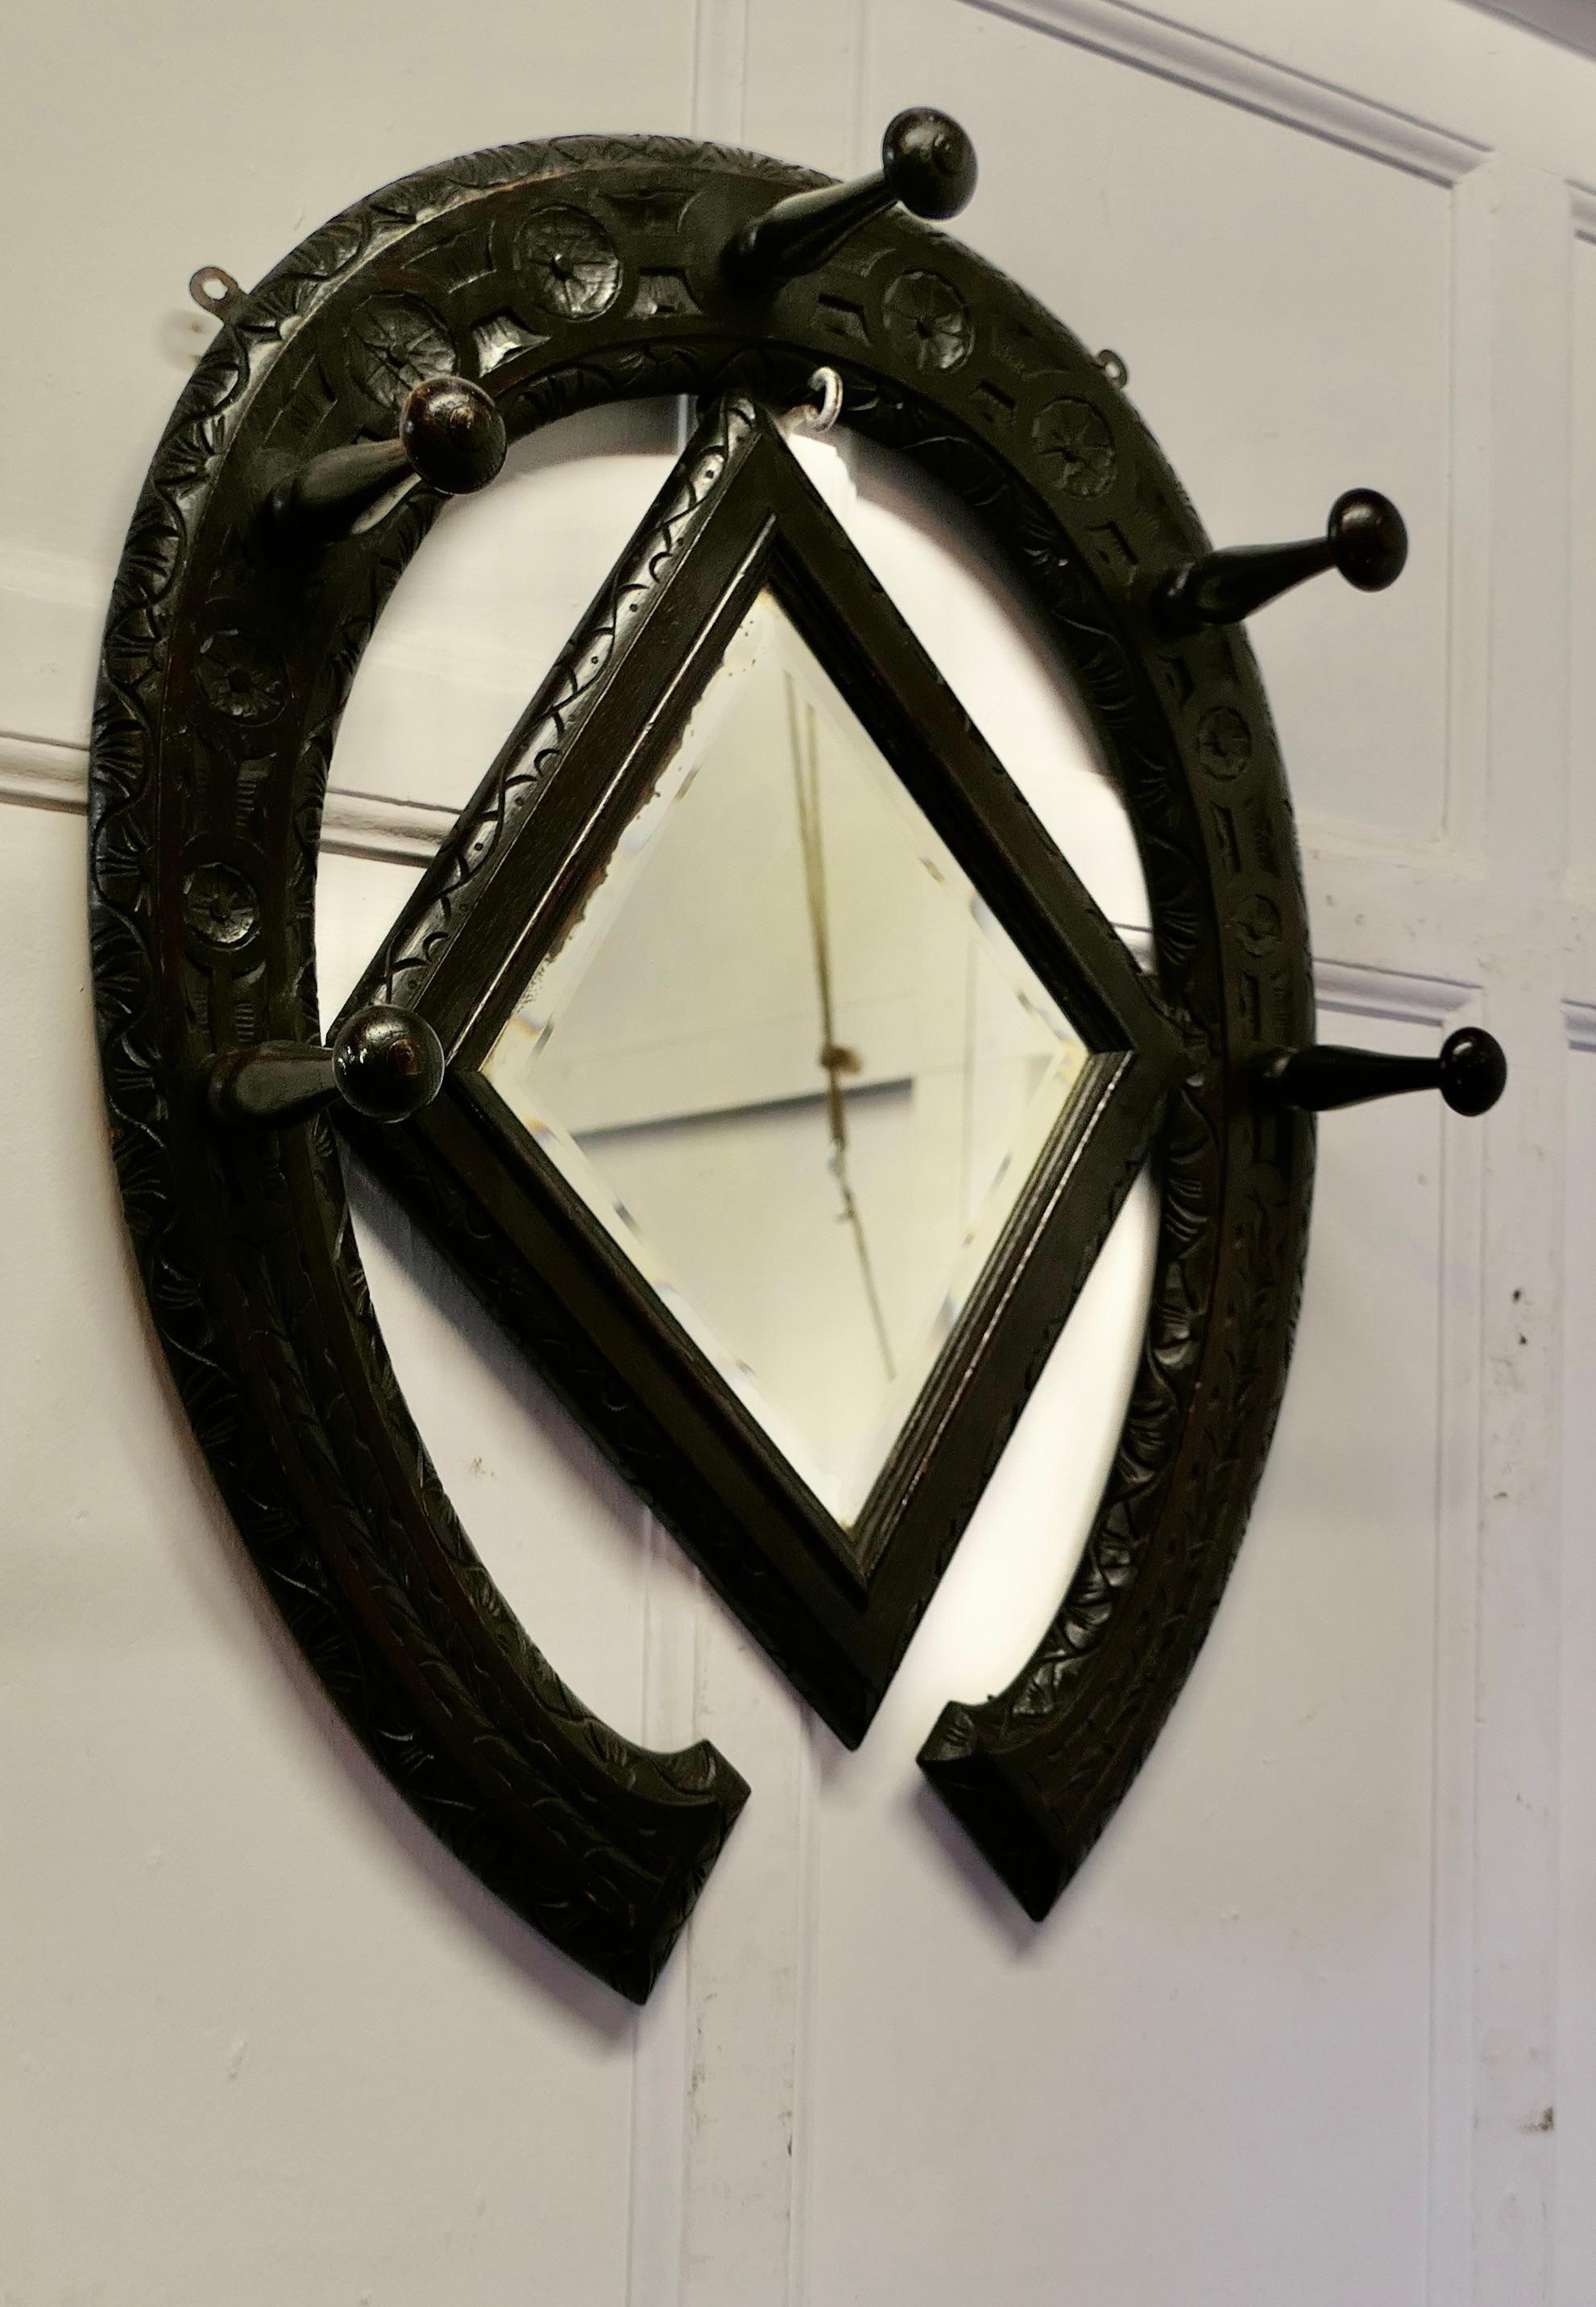 Gothic Horseshoe Coat and Tack Rack with Mirror


A very fine quality piece made and carved in Oak

Beautifully made in the shape of a horseshoe with 5 turned wooden farriers nails forming the hooks, good for coats, hats and tac and a Diamond shaped